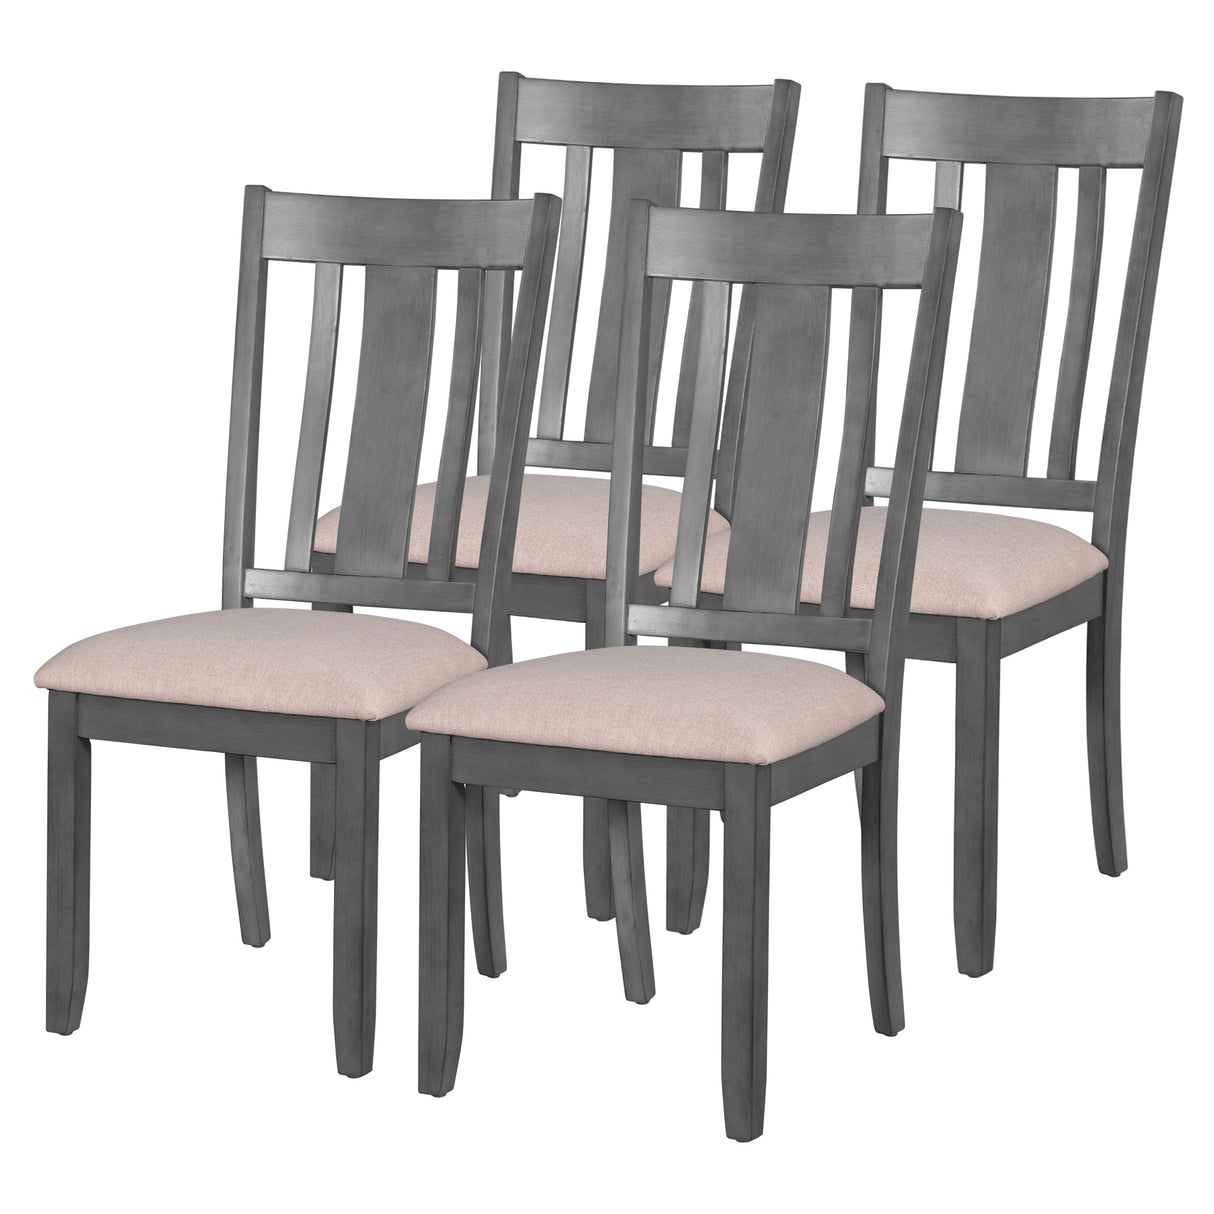 TREXM Industrial Style Wooden Dining Chairs with Ergonomic Design, Set of 4 (Gray) - Home Elegance USA